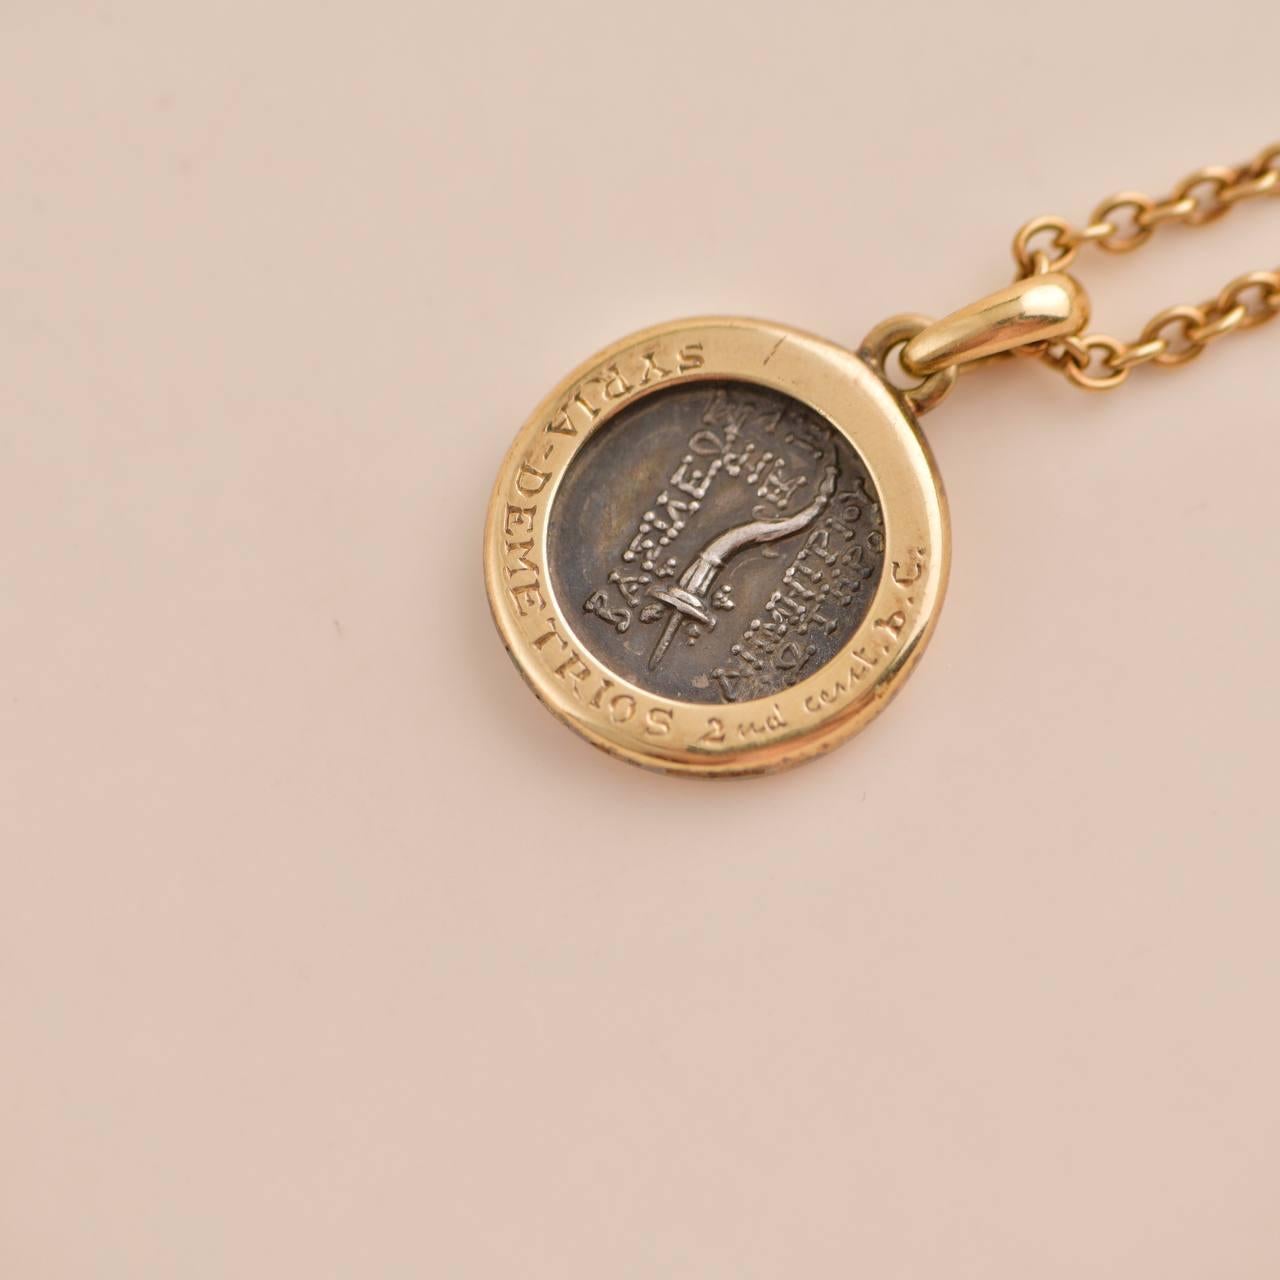 Bvlgari Monete Yellow Gold Antique Coin Necklace In Excellent Condition For Sale In Banbury, GB